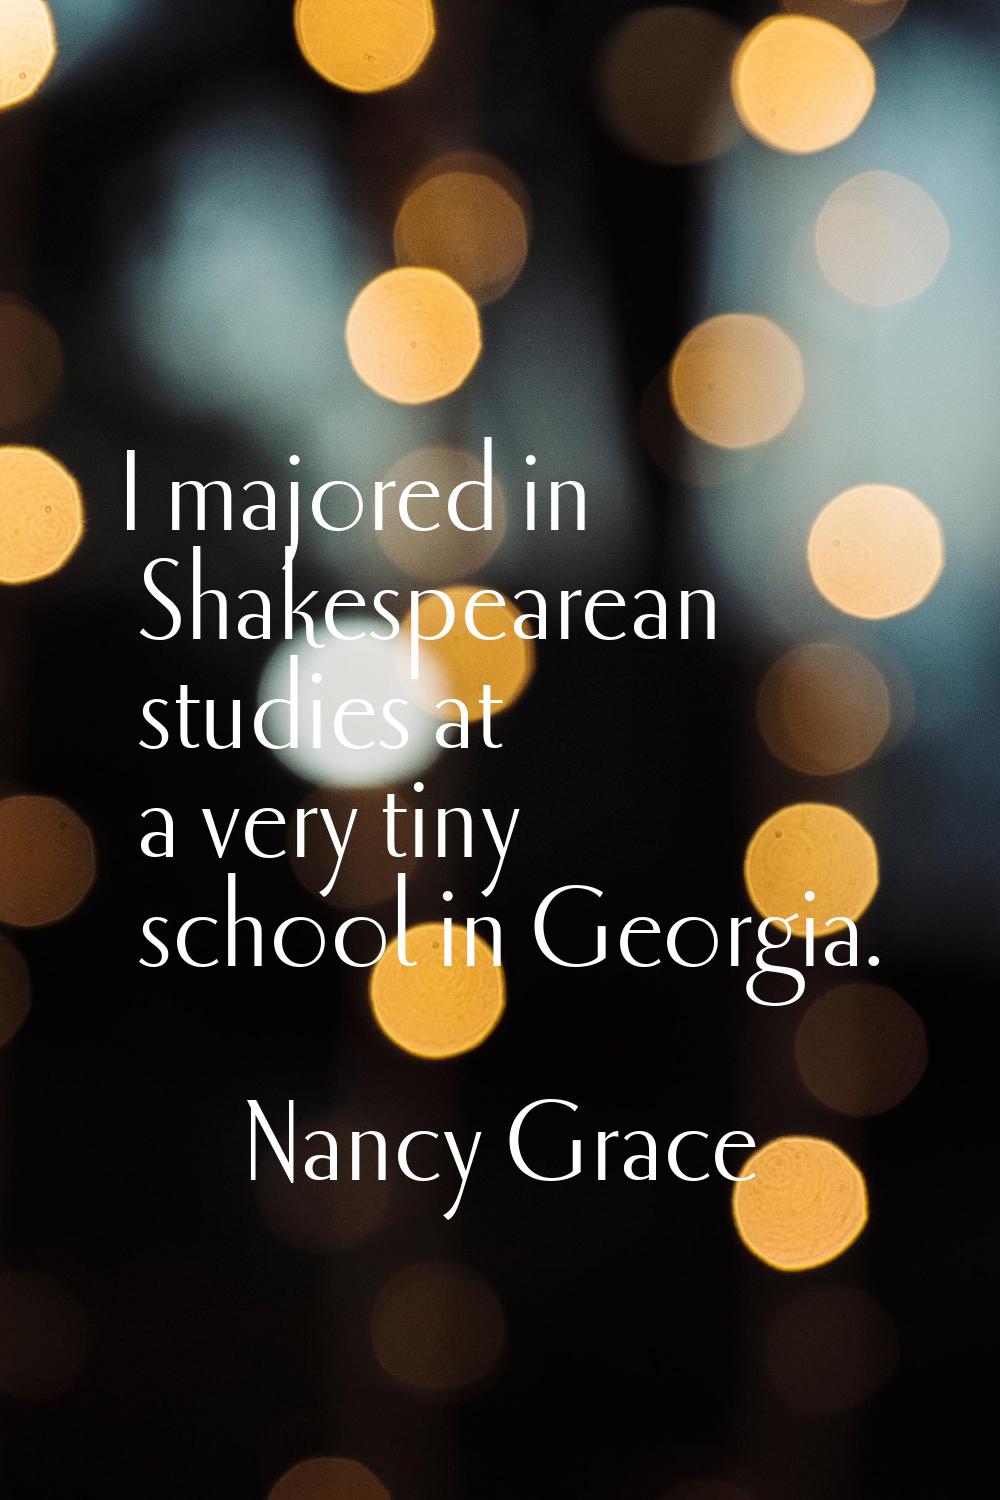 I majored in Shakespearean studies at a very tiny school in Georgia.